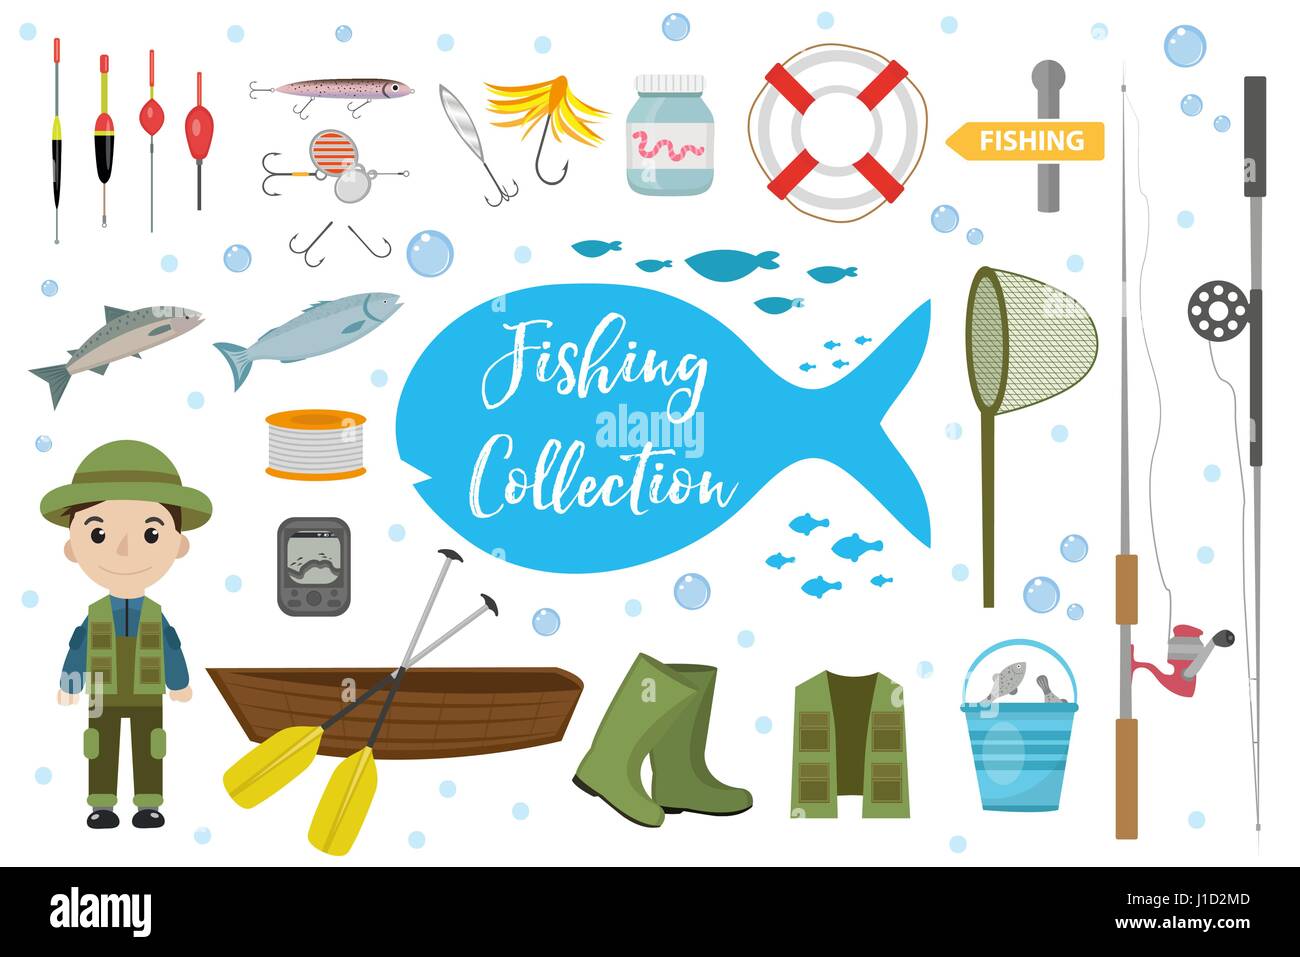 Isolated object fishnet and fishing symbol Vector Image